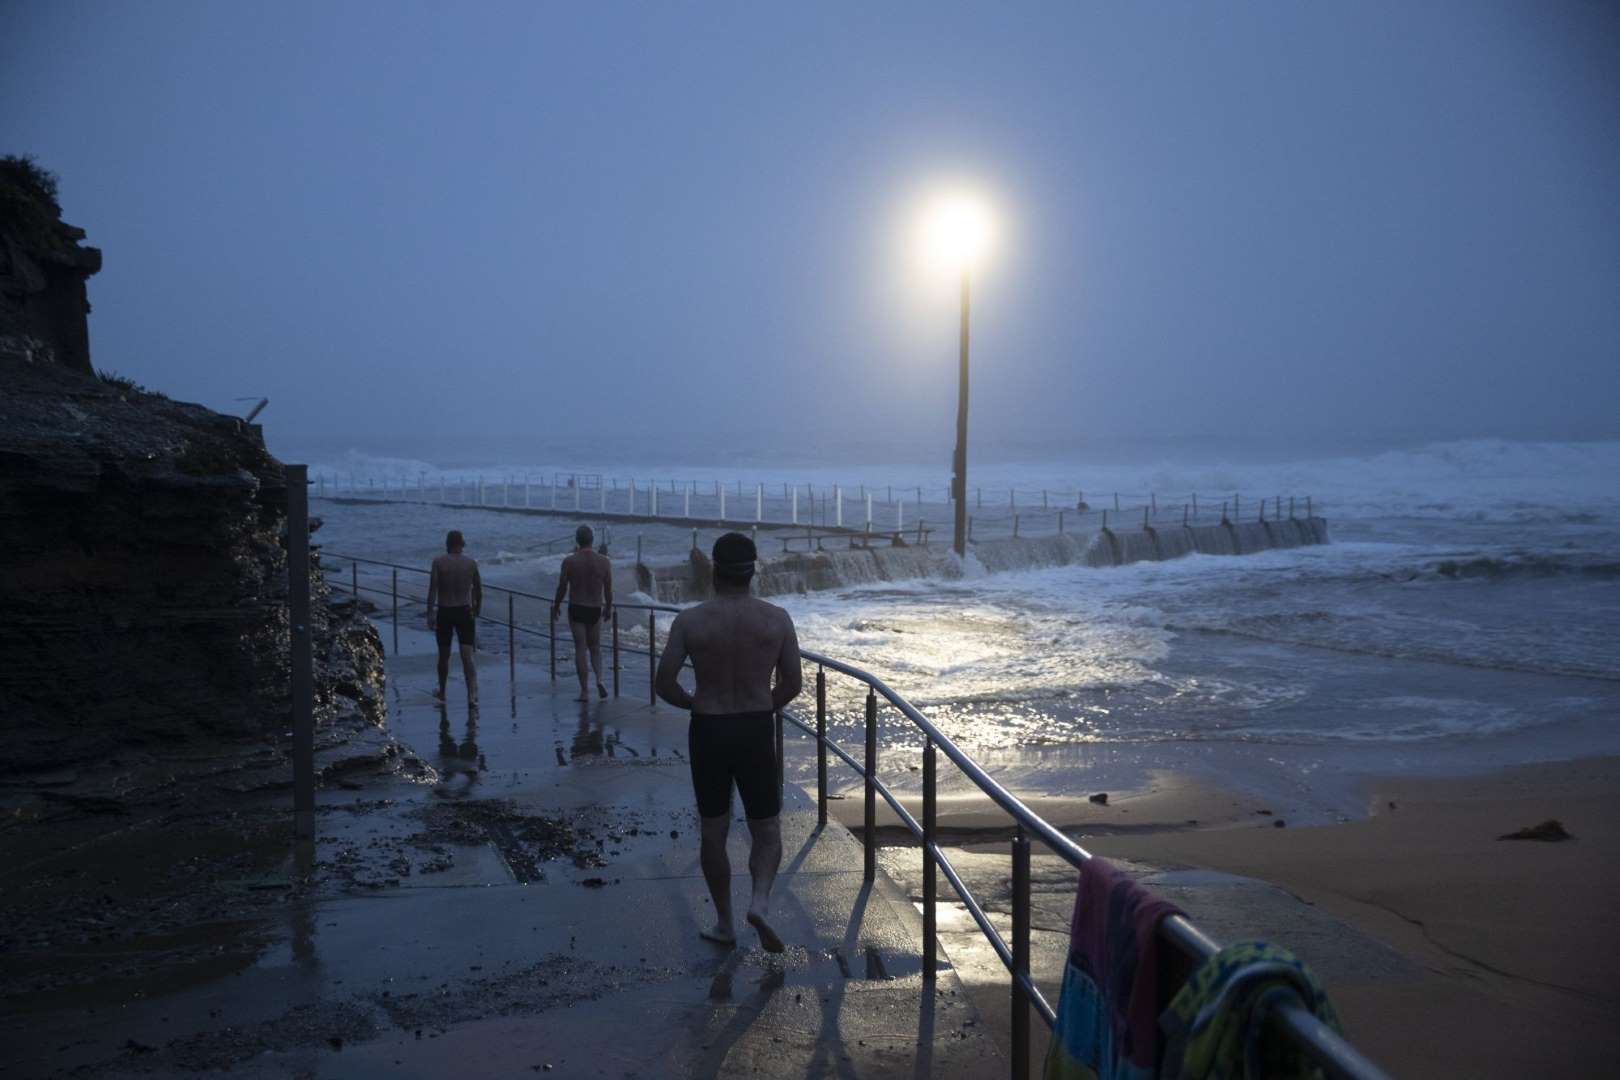 Swimmers observe beach erosion is seen at Collaroy on the Northern Beaches as a high tide and large waves impact the coast on 10 February 2020 in Sydney, Australia. The Sydney area experienced its wettest weekend in more than 20 years, with strong winds and torrential rain causing flash flooding across the city. Photo: Brook Mitchell / Getty Images